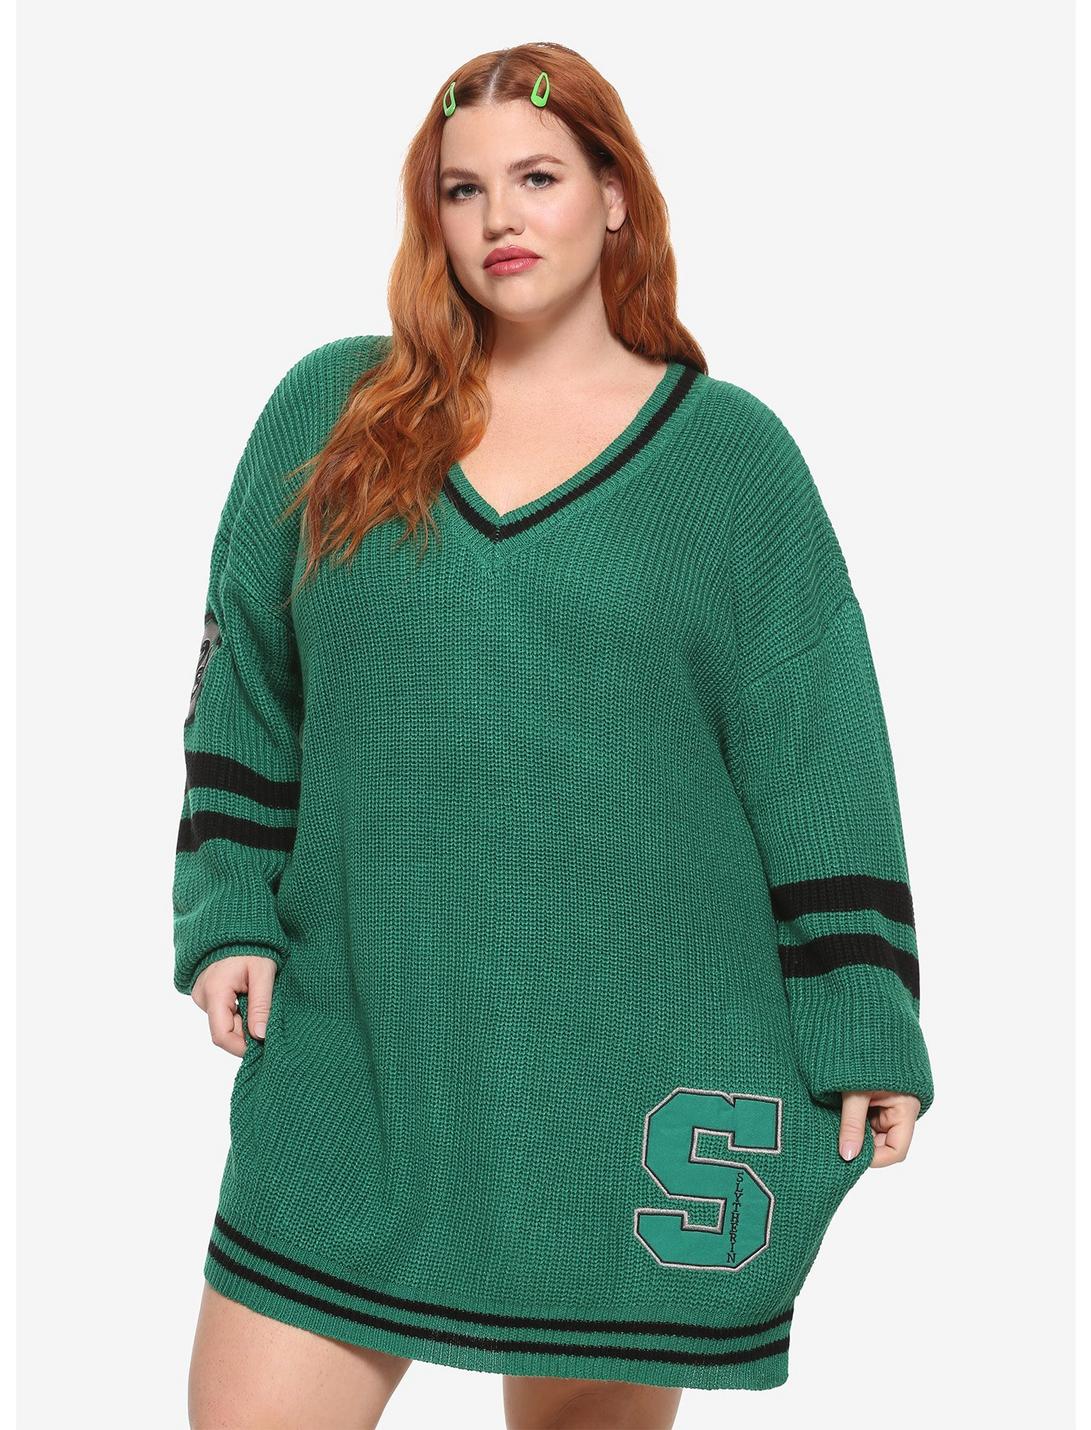 Harry Potter Slytherin Sweater Dress Plus Size, GREEN, hi-res